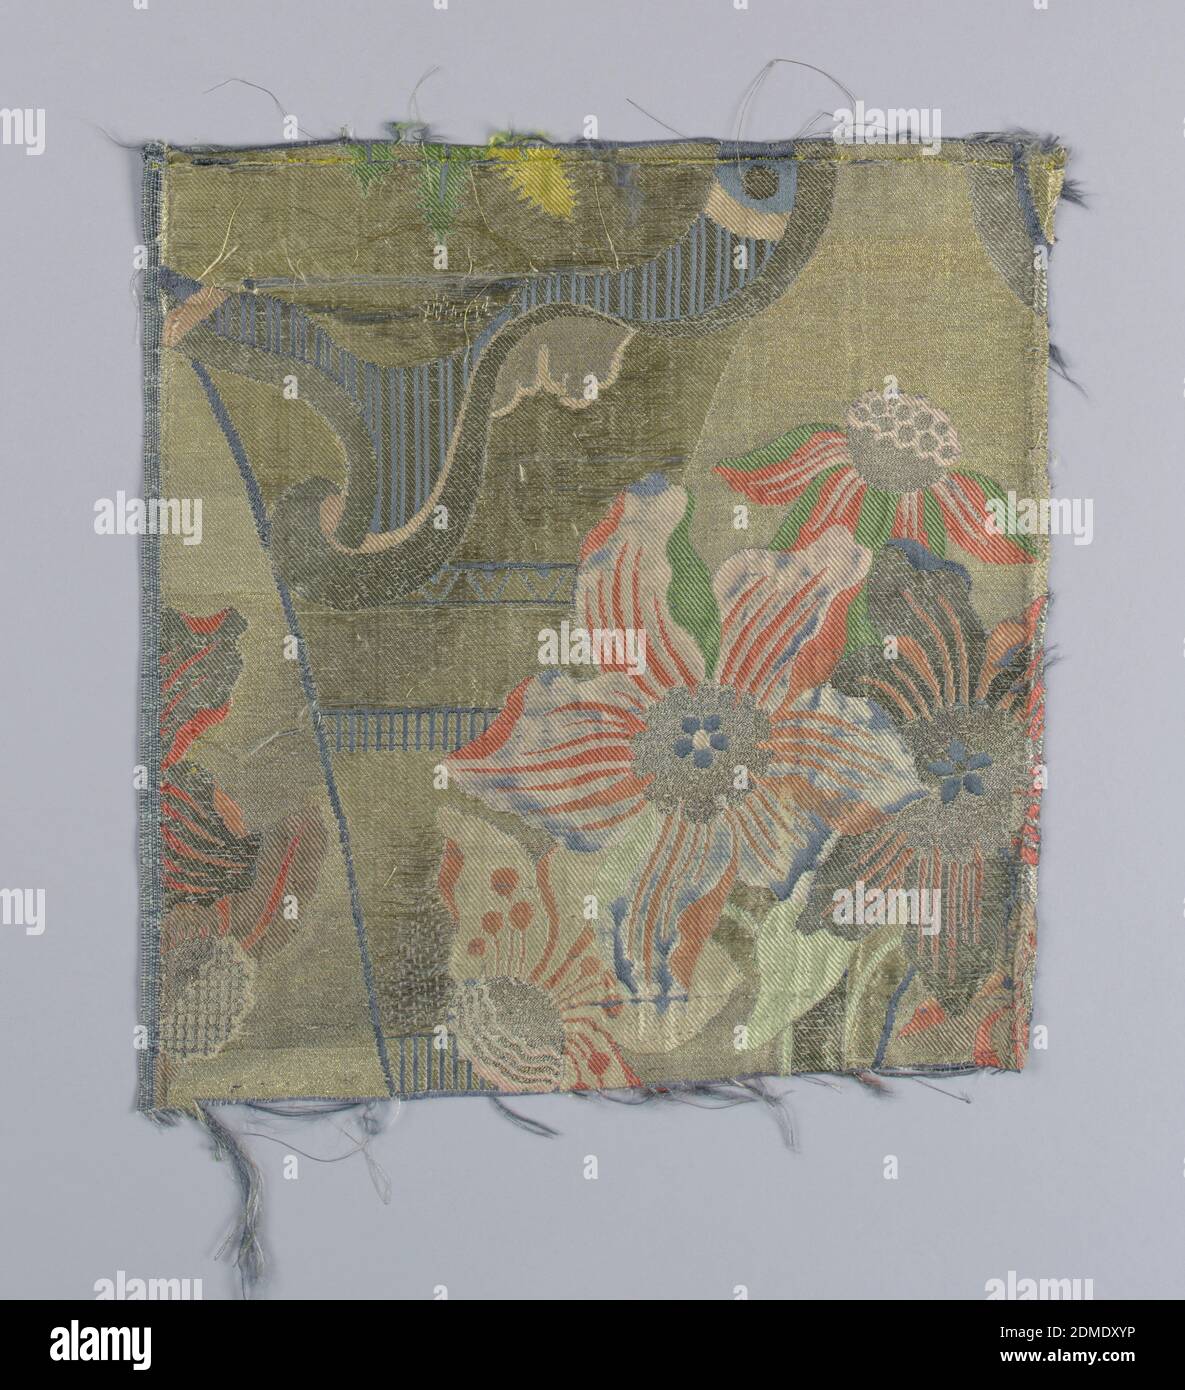 Textile, Medium: silk, metallic threads Technique: 8-harness satin with discontinuous supplementary weft patterning (brocade) bound in 1/3 twill, A large pot or bulb with a tall sprouting stem with four amarylis-like flowers; from the same pot a hanging plant descends, resembling a date palm. Of a second motif, only the bottom of a conical vase form is visible on A. The vertical repeat is completed in fragment B. In light blue, green, orange, yellow, and off-white silks on a metallic gold ground., Europe, 1705–07, woven textiles, Textile Stock Photo